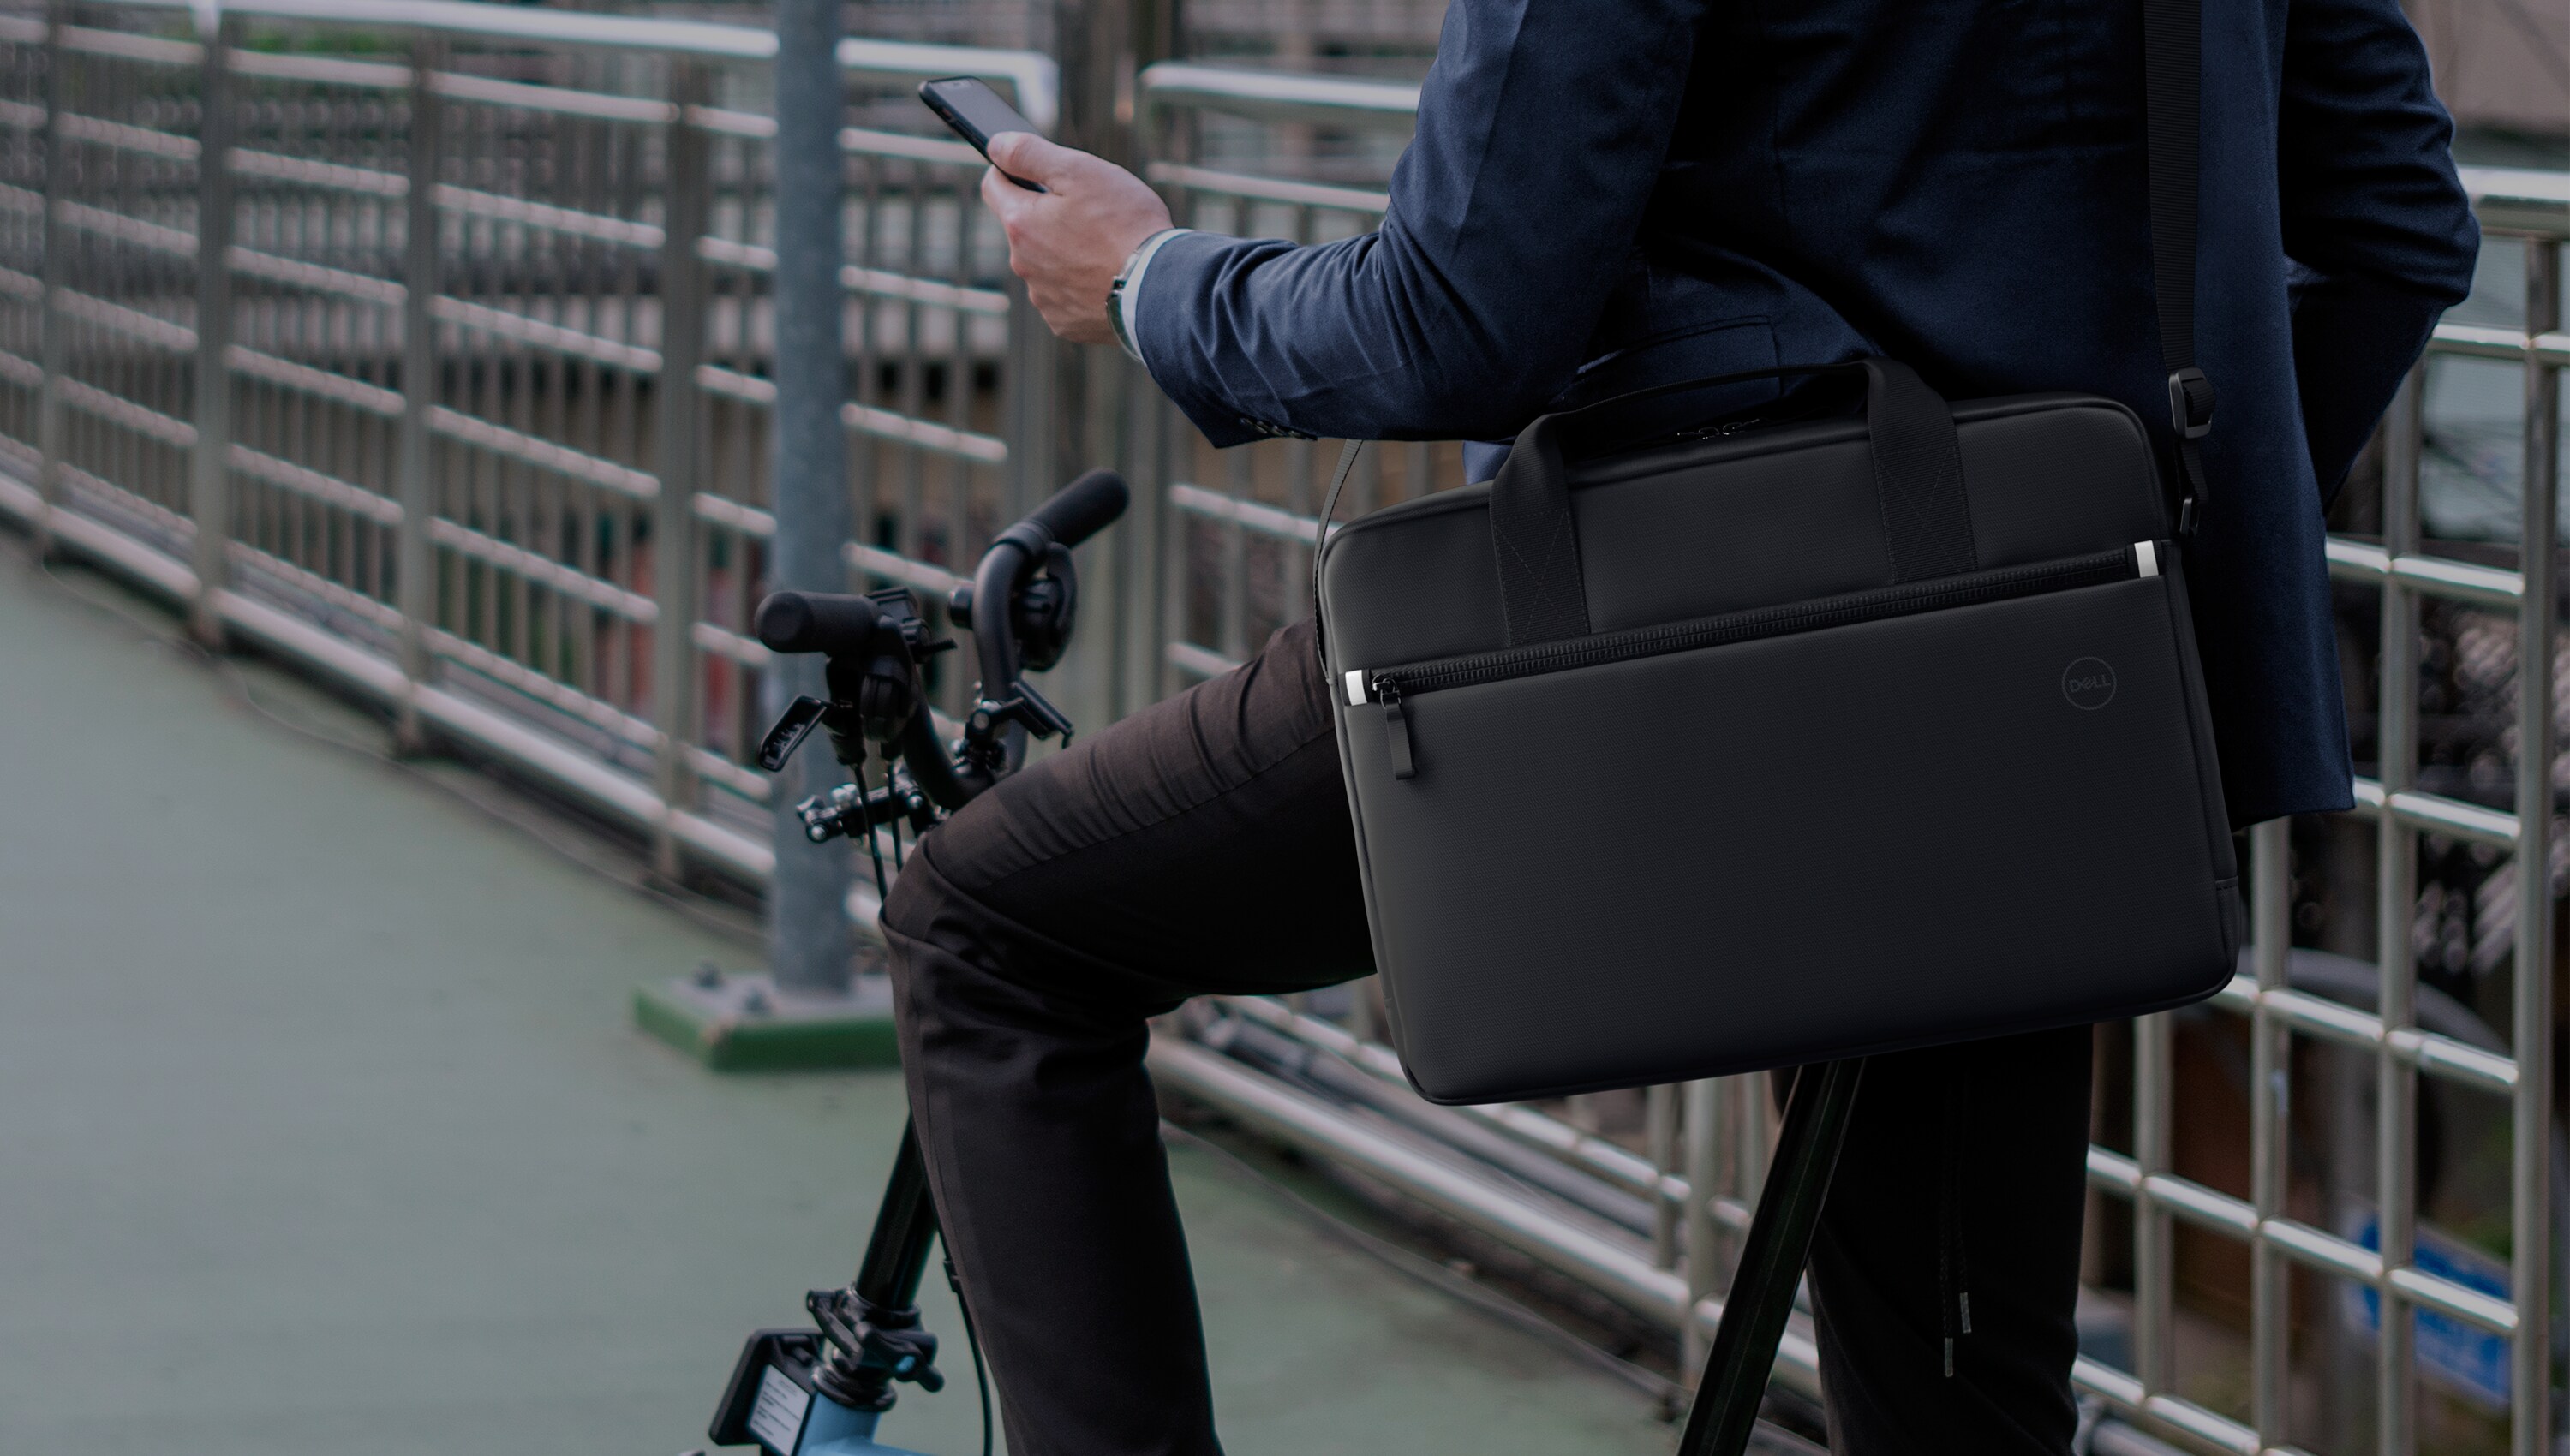 Man on a bicycle holding a cell phone in his left hand with a briefcase across his chest.